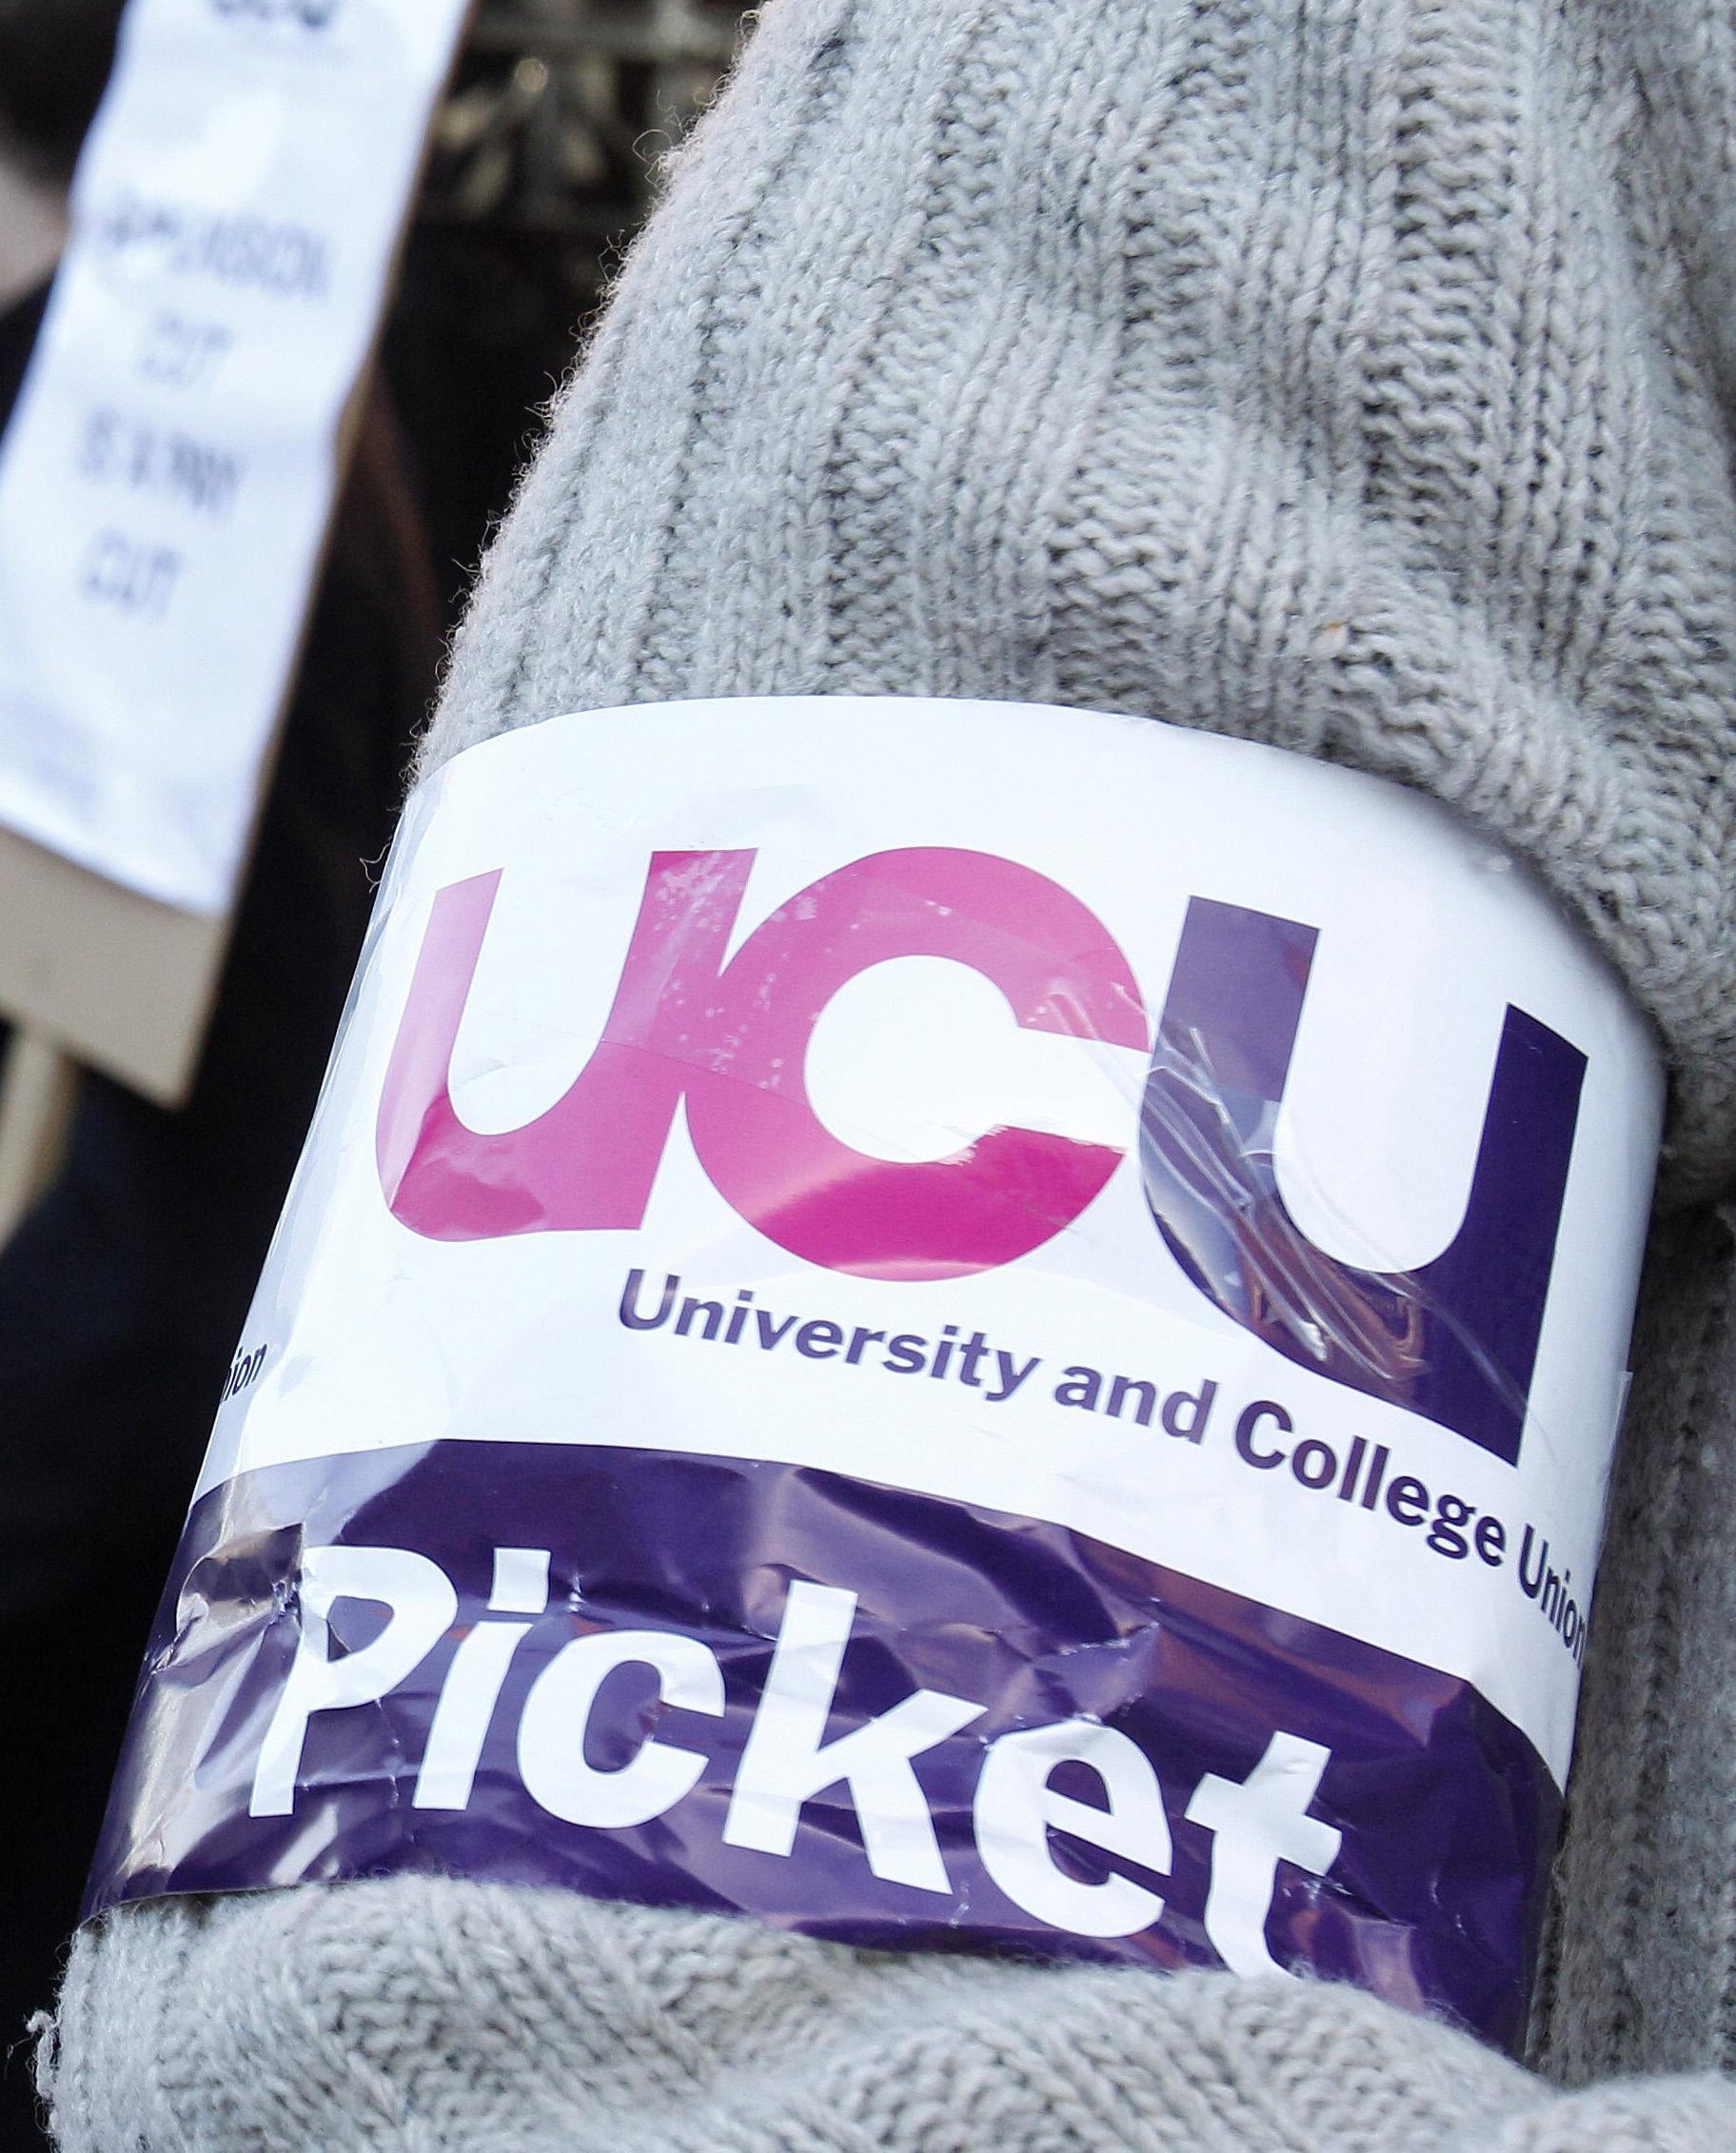 The University and College Union has said it will ballot for industrial action next month (Peter Byrne/PA)